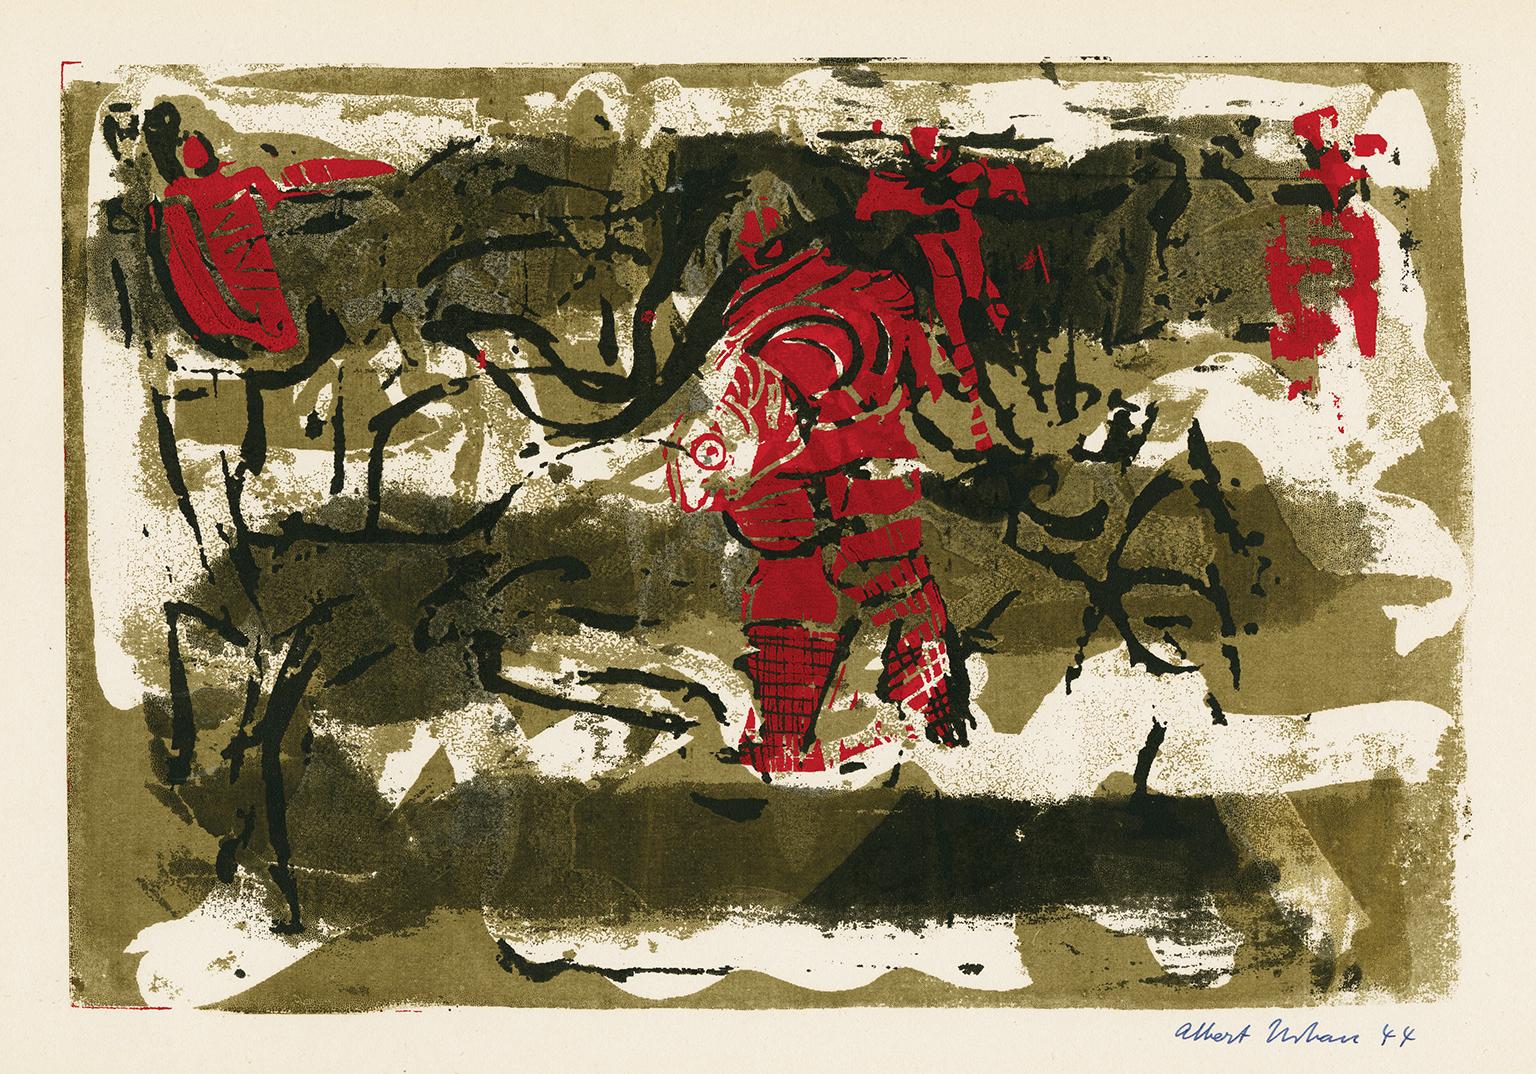 Albert Urban Abstract Print - Untitled Abstraction (Figures in Red)